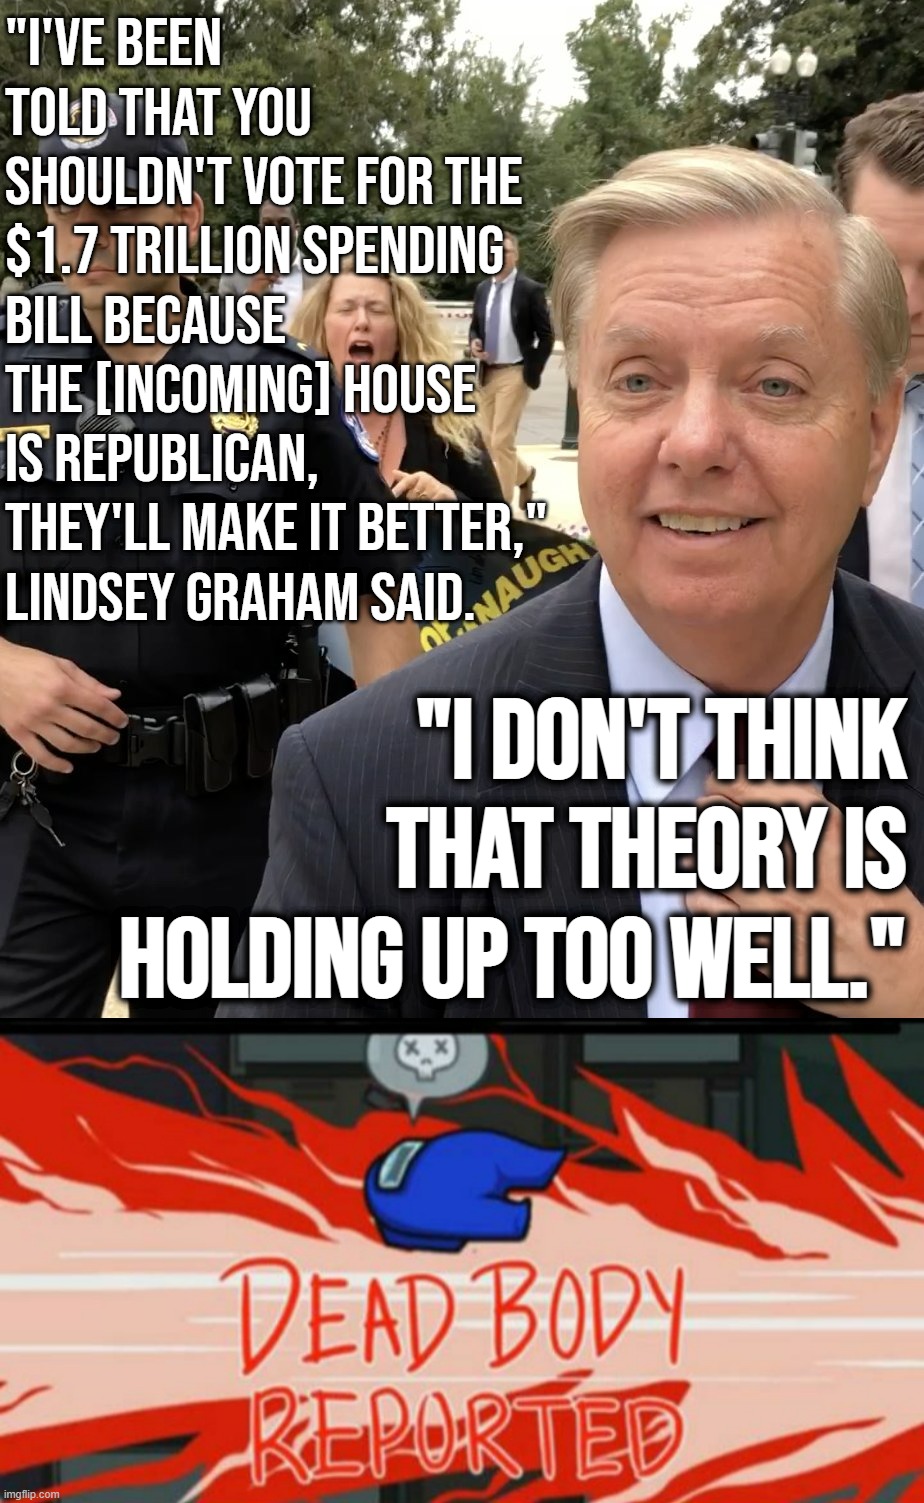 The Thug Life of Lindsey Graham. I've always said that no one roasts Republicans like another Republican | "I'VE BEEN TOLD THAT YOU SHOULDN'T VOTE FOR THE $1.7 TRILLION SPENDING BILL BECAUSE THE [INCOMING] HOUSE IS REPUBLICAN, THEY'LL MAKE IT BETTER," LINDSEY GRAHAM SAID. "I DON'T THINK THAT THEORY IS HOLDING UP TOO WELL." | image tagged in lindsey graham thug life,dead body reported,lindsey graham,republicans,republican party,gop | made w/ Imgflip meme maker